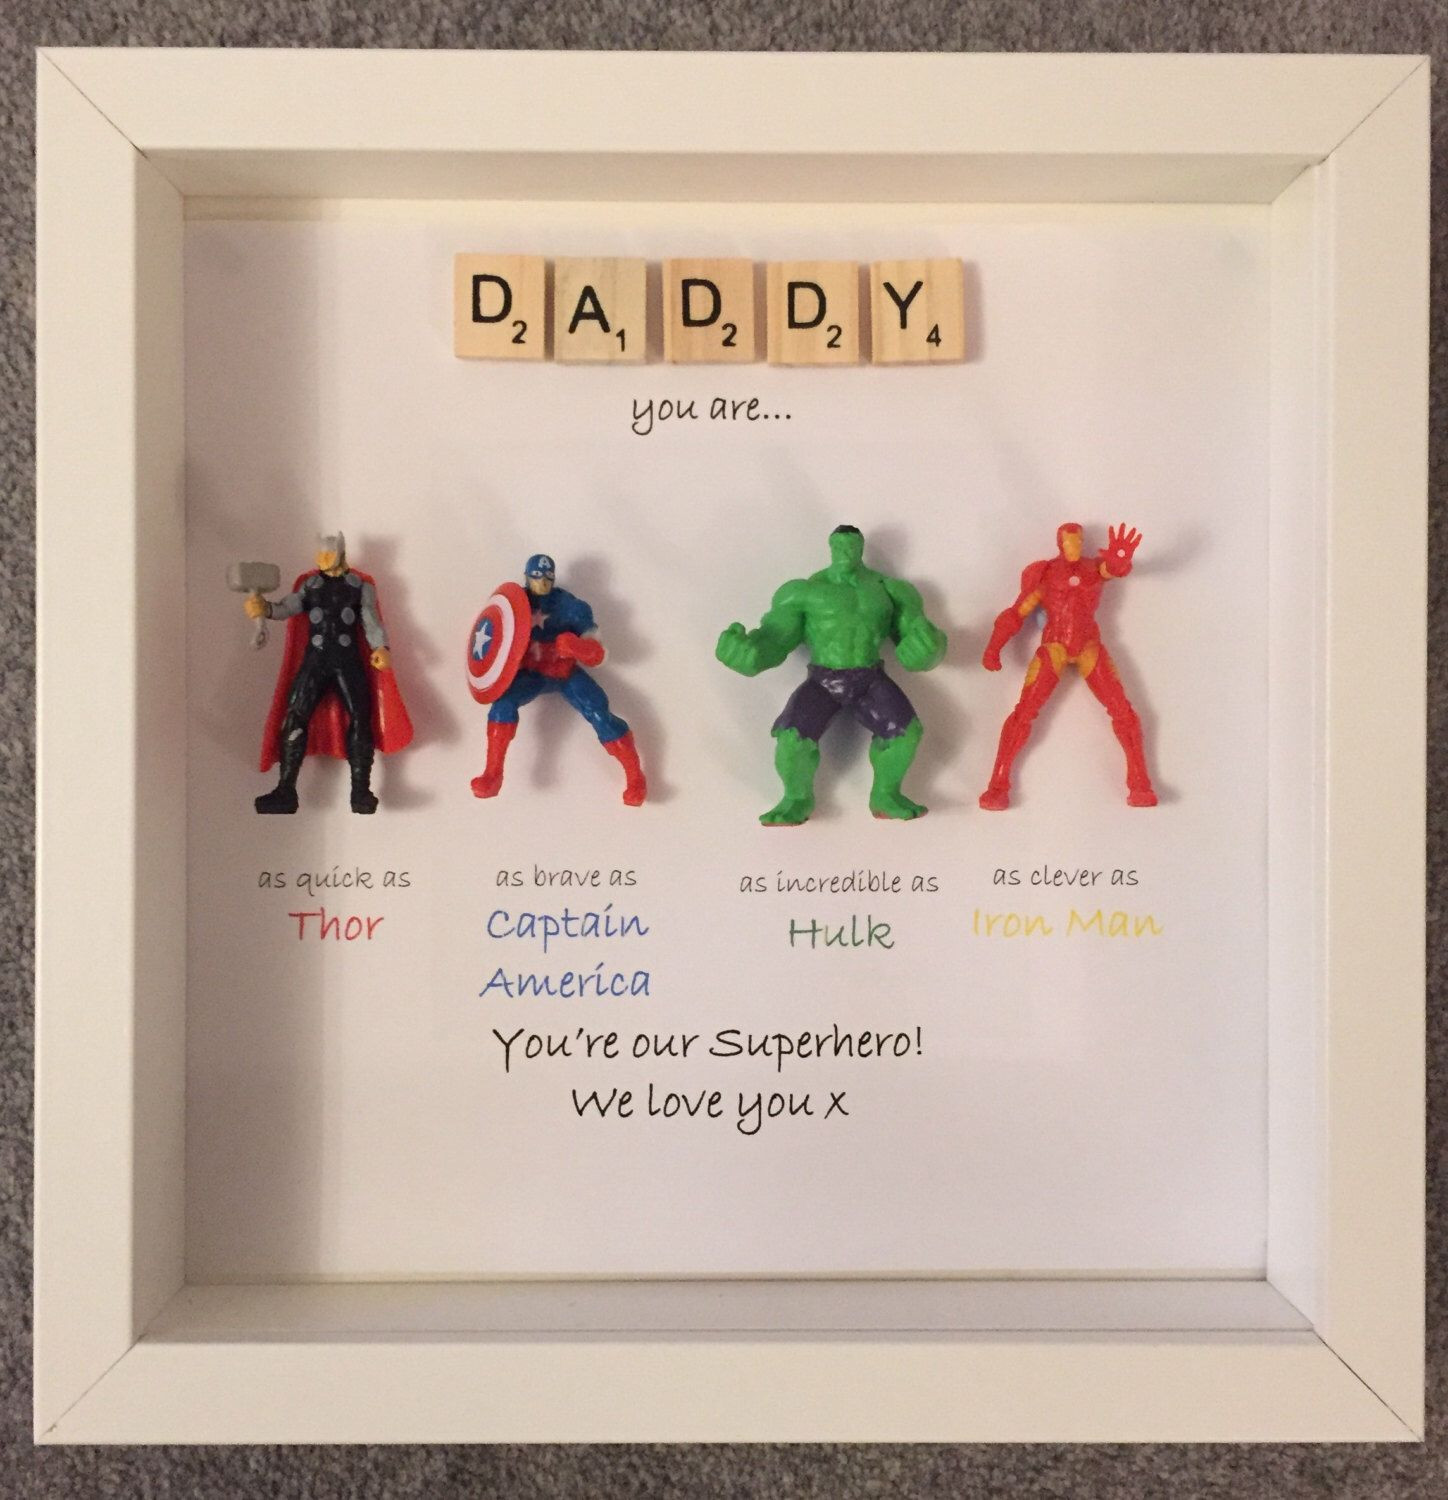 Dad Birthday Gift Ideas
 Avengers Superhero figures frame t Ideal for dad